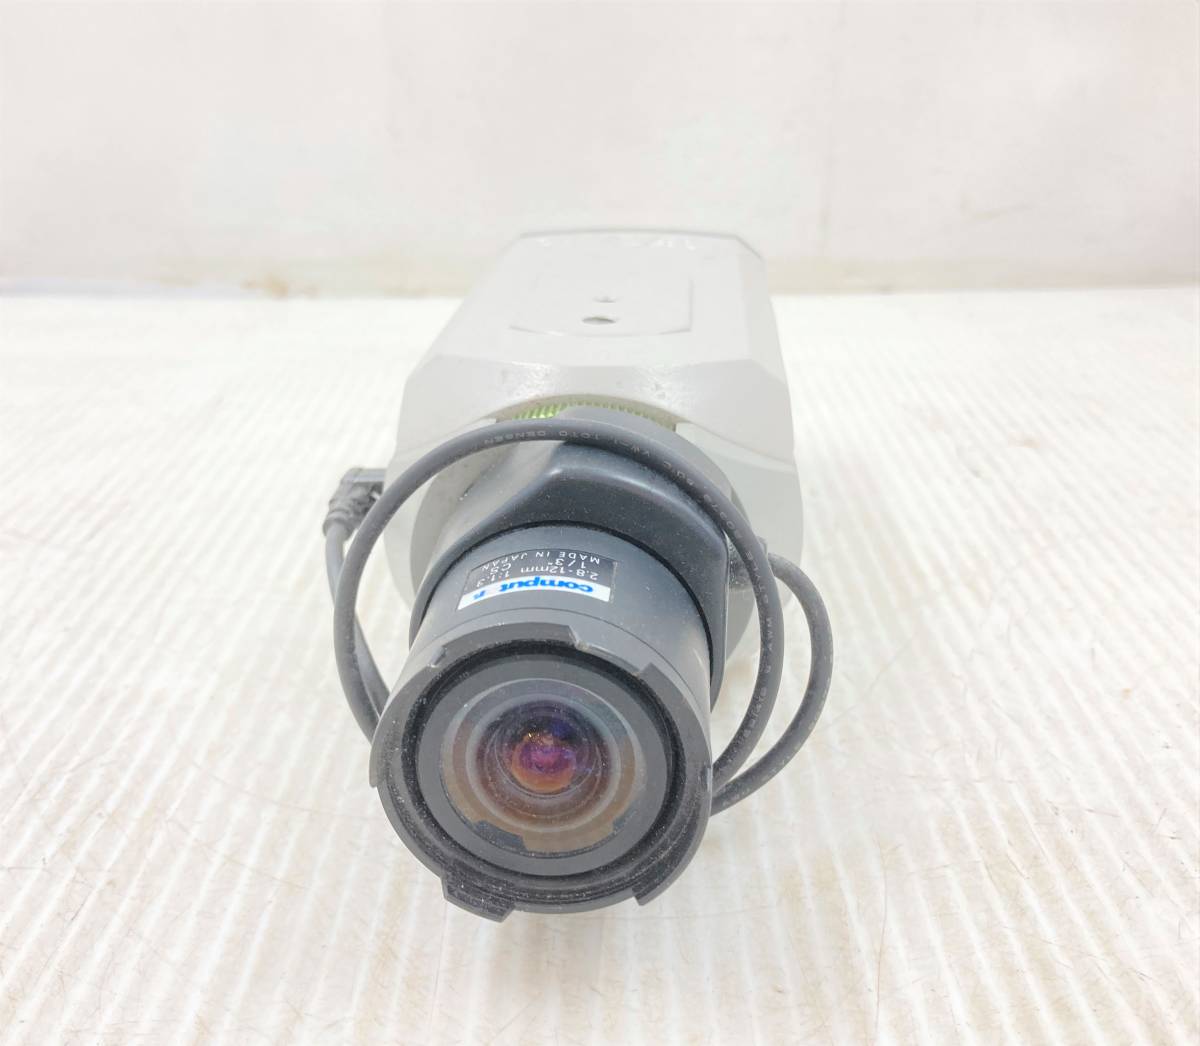  several arrival * dot ue ruby * M *es security camera DODC-H1 secondhand goods 